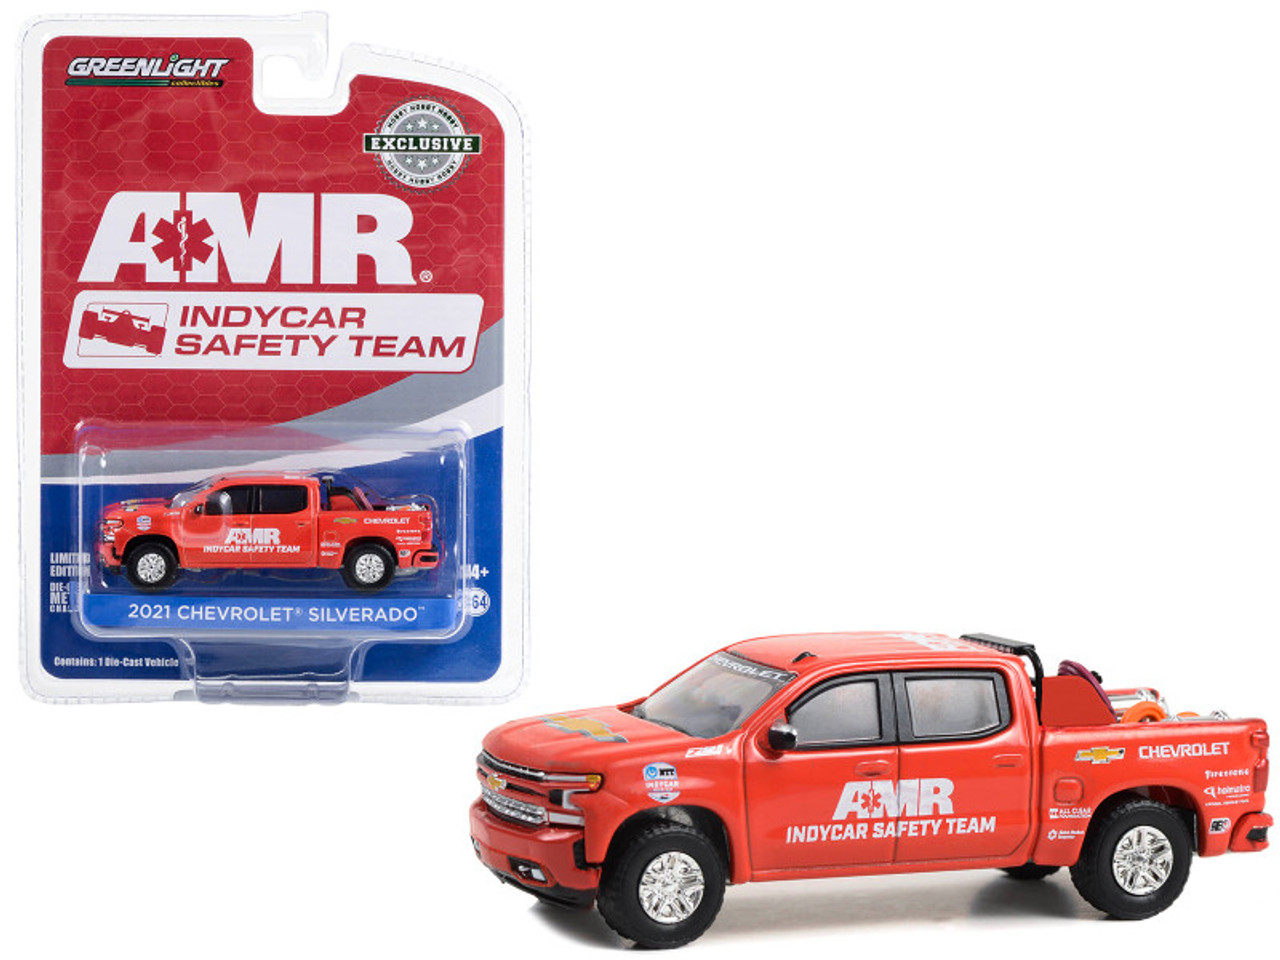 2021 Chevrolet Silverado Pickup Truck Red "2021 NTT IndyCar Series AMR IndyCar Safety Team" with Safety Equipment in Truck Bed "Hobby Exclusive" Series 1/64 Diecast Model by Greenlight